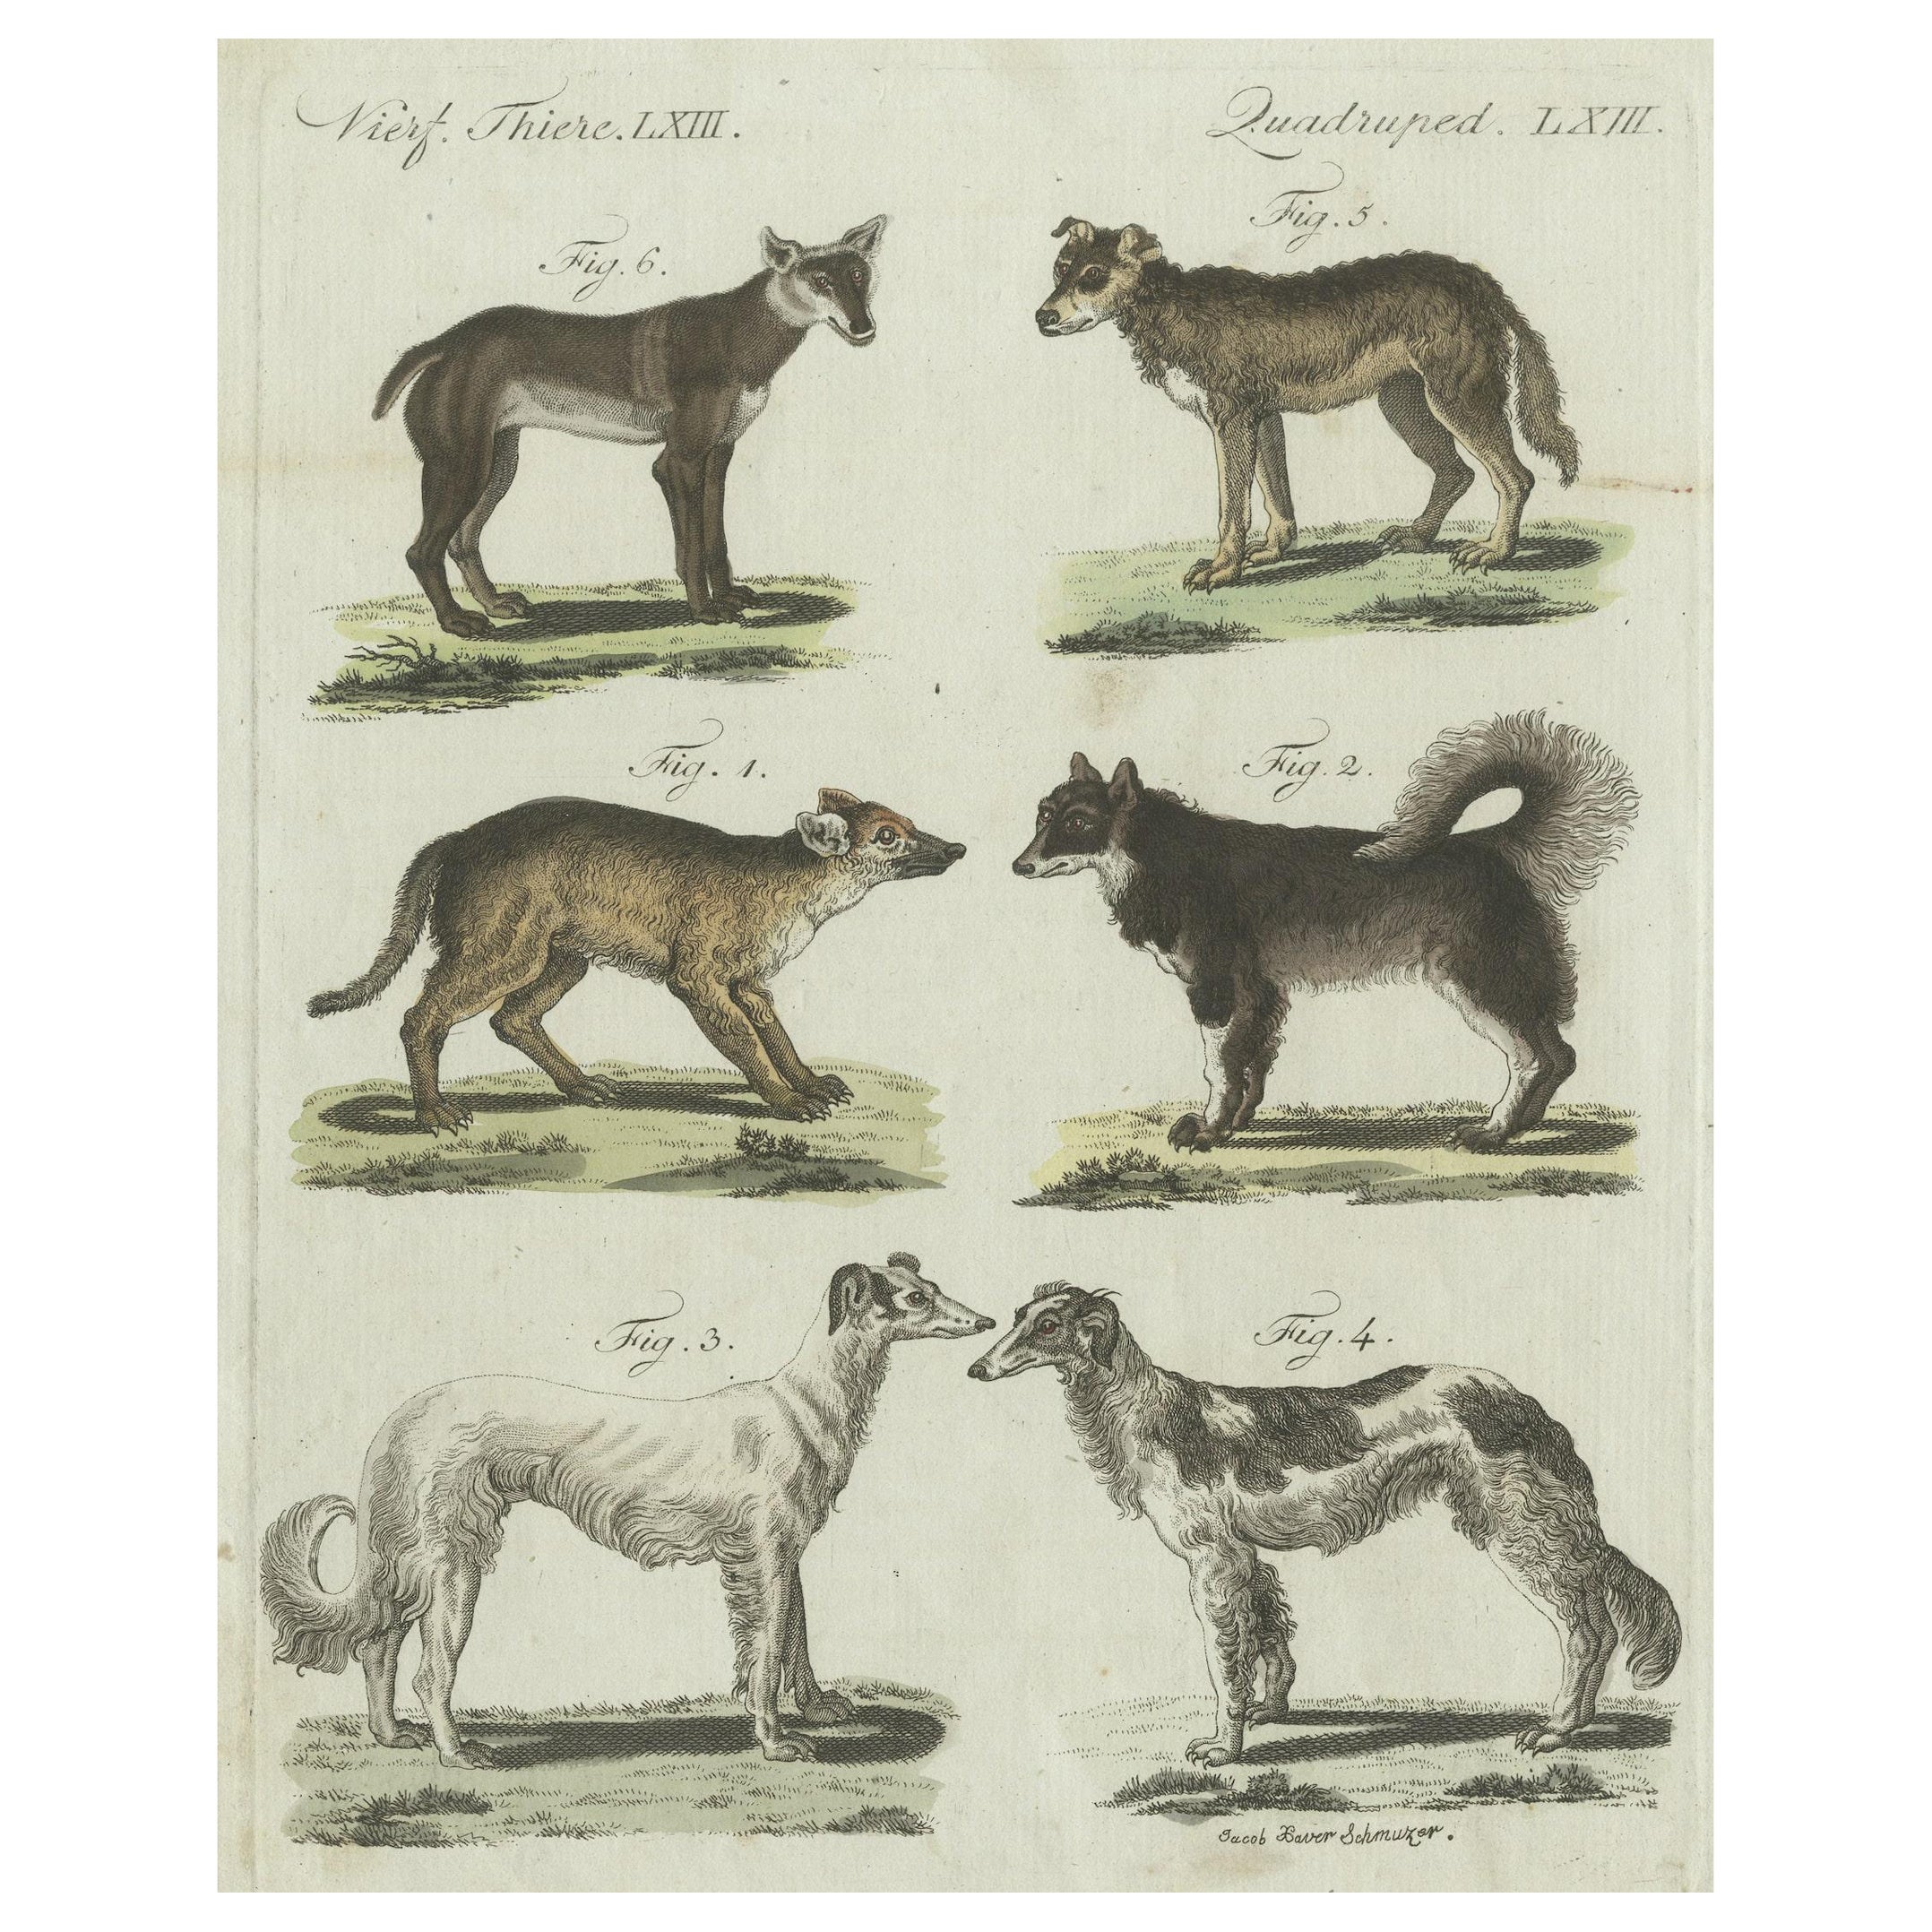 Antique Print of 6 Dog Breeds, most likely including the Western Siberian Laika